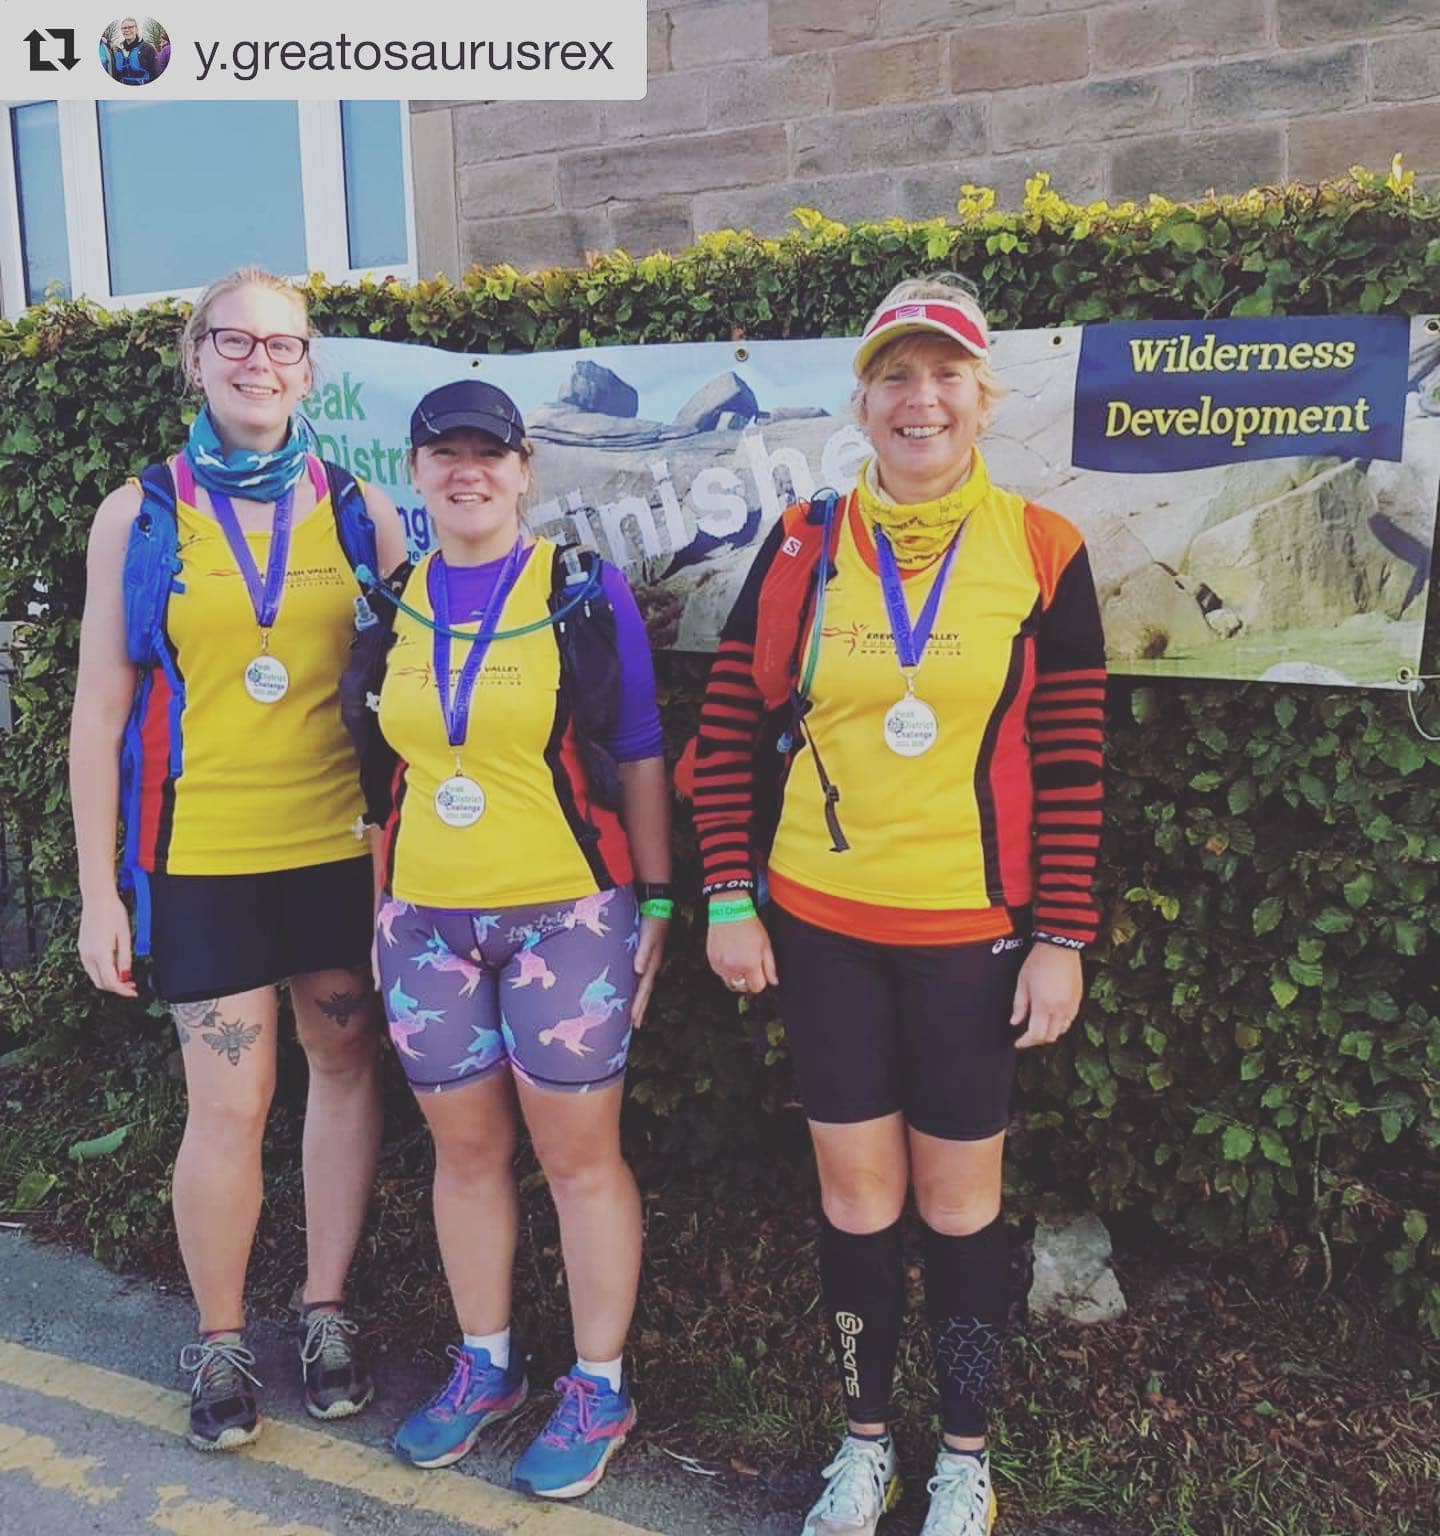 Repost from @y.greatosaurusrex - an awesome effort from these ladies ⛰
・・・
Came home with more fo...